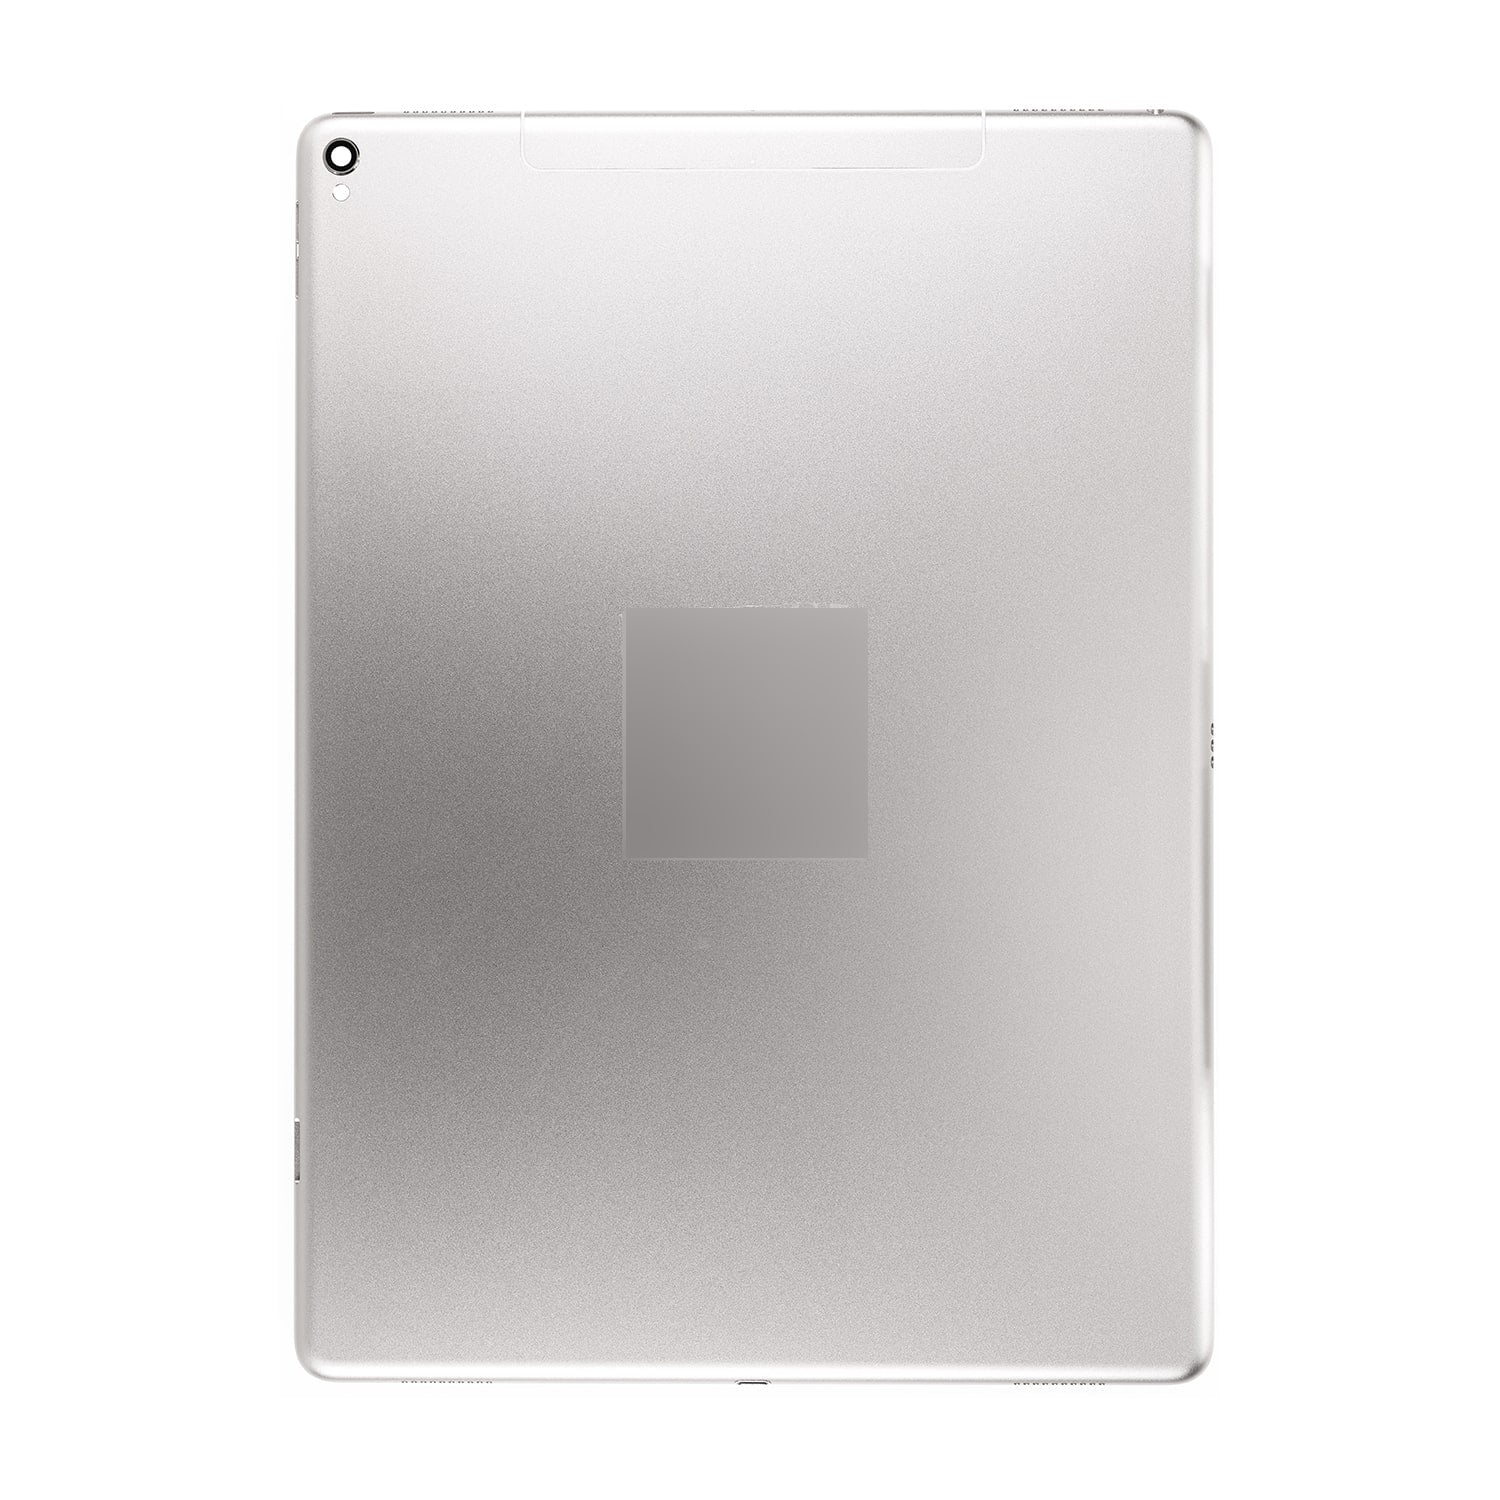 BACK COVER WIFI + CELLULAR VERSION FOR IPAD PRO 12.9 2ND GEN- SILVER